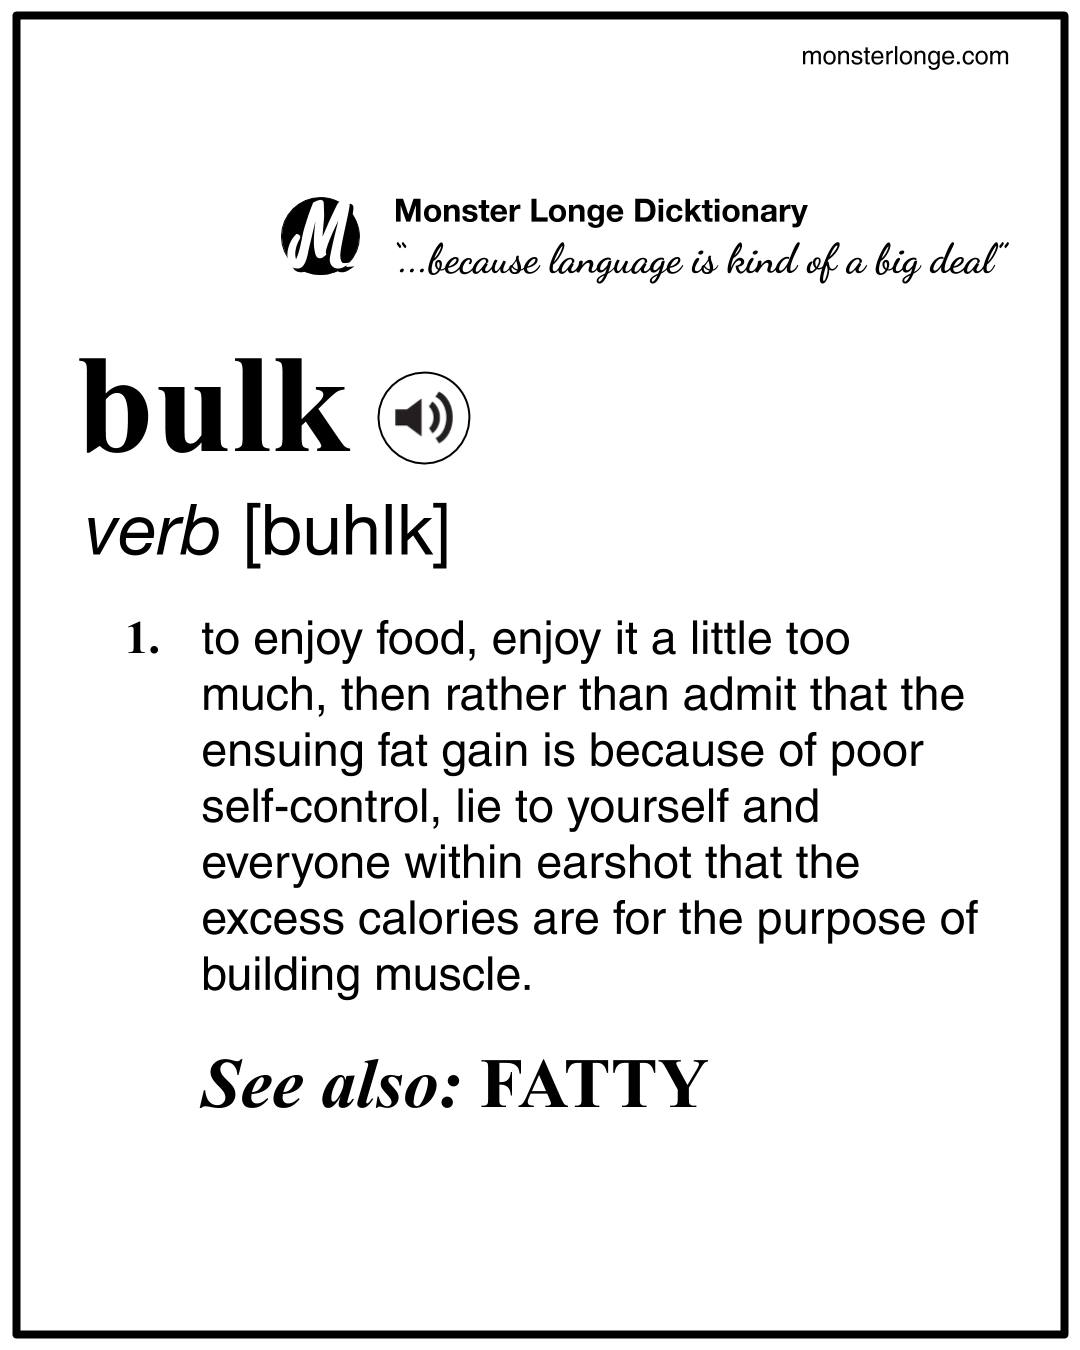 Bulk: to enjoy food, enjoy it a little too much, then rather than admit that the ensuing fat gain is because of poor self-control, lie to yourself and everyone within earshot that the excess calories are for the purpose of building muscle. See also: FATTY